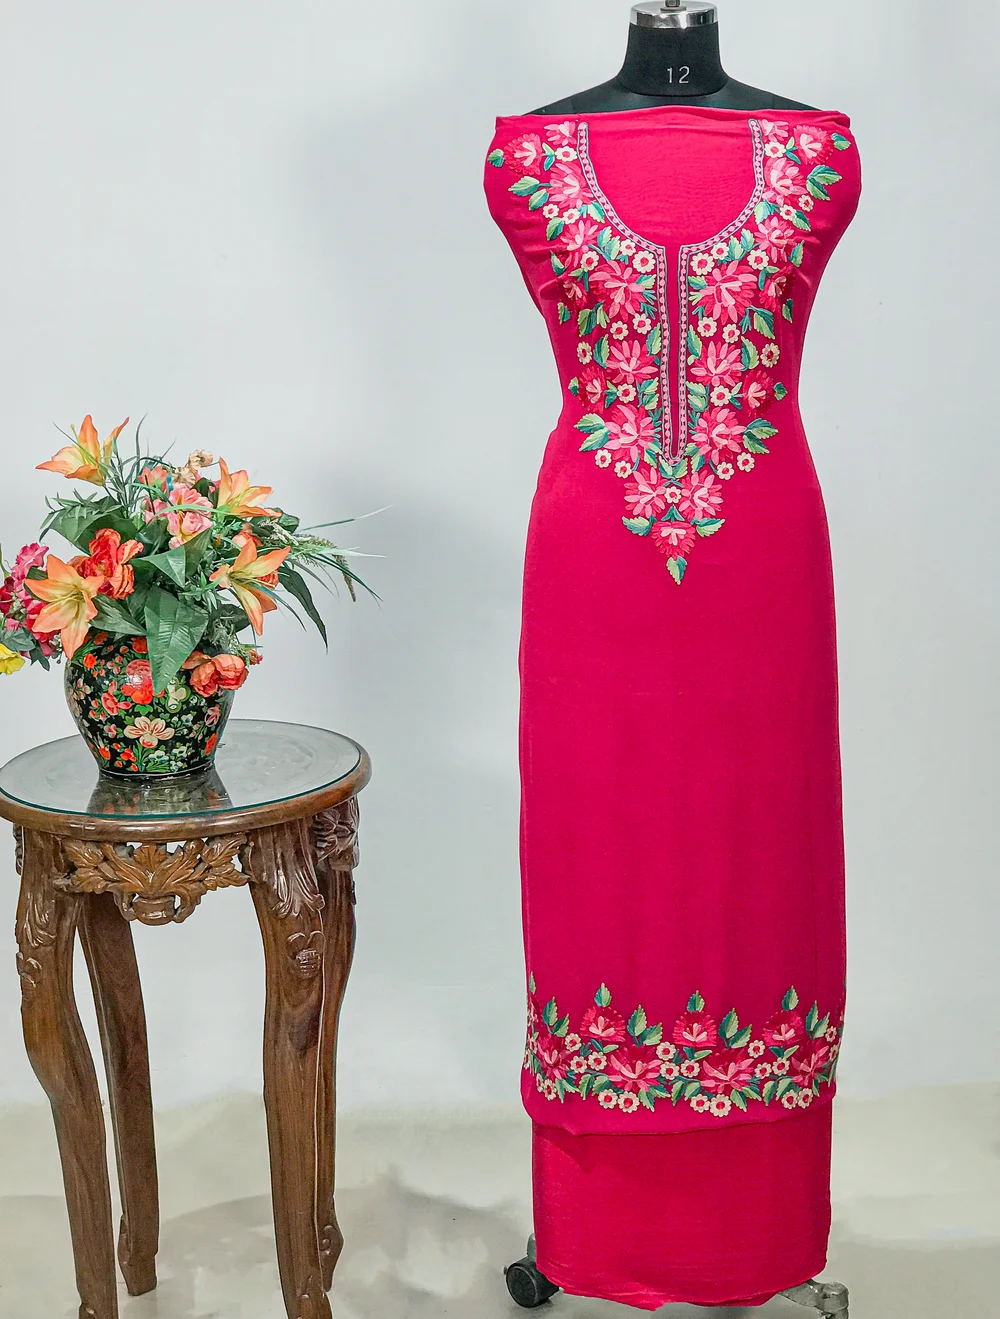 Details more than 144 embroidery designs for suits latest